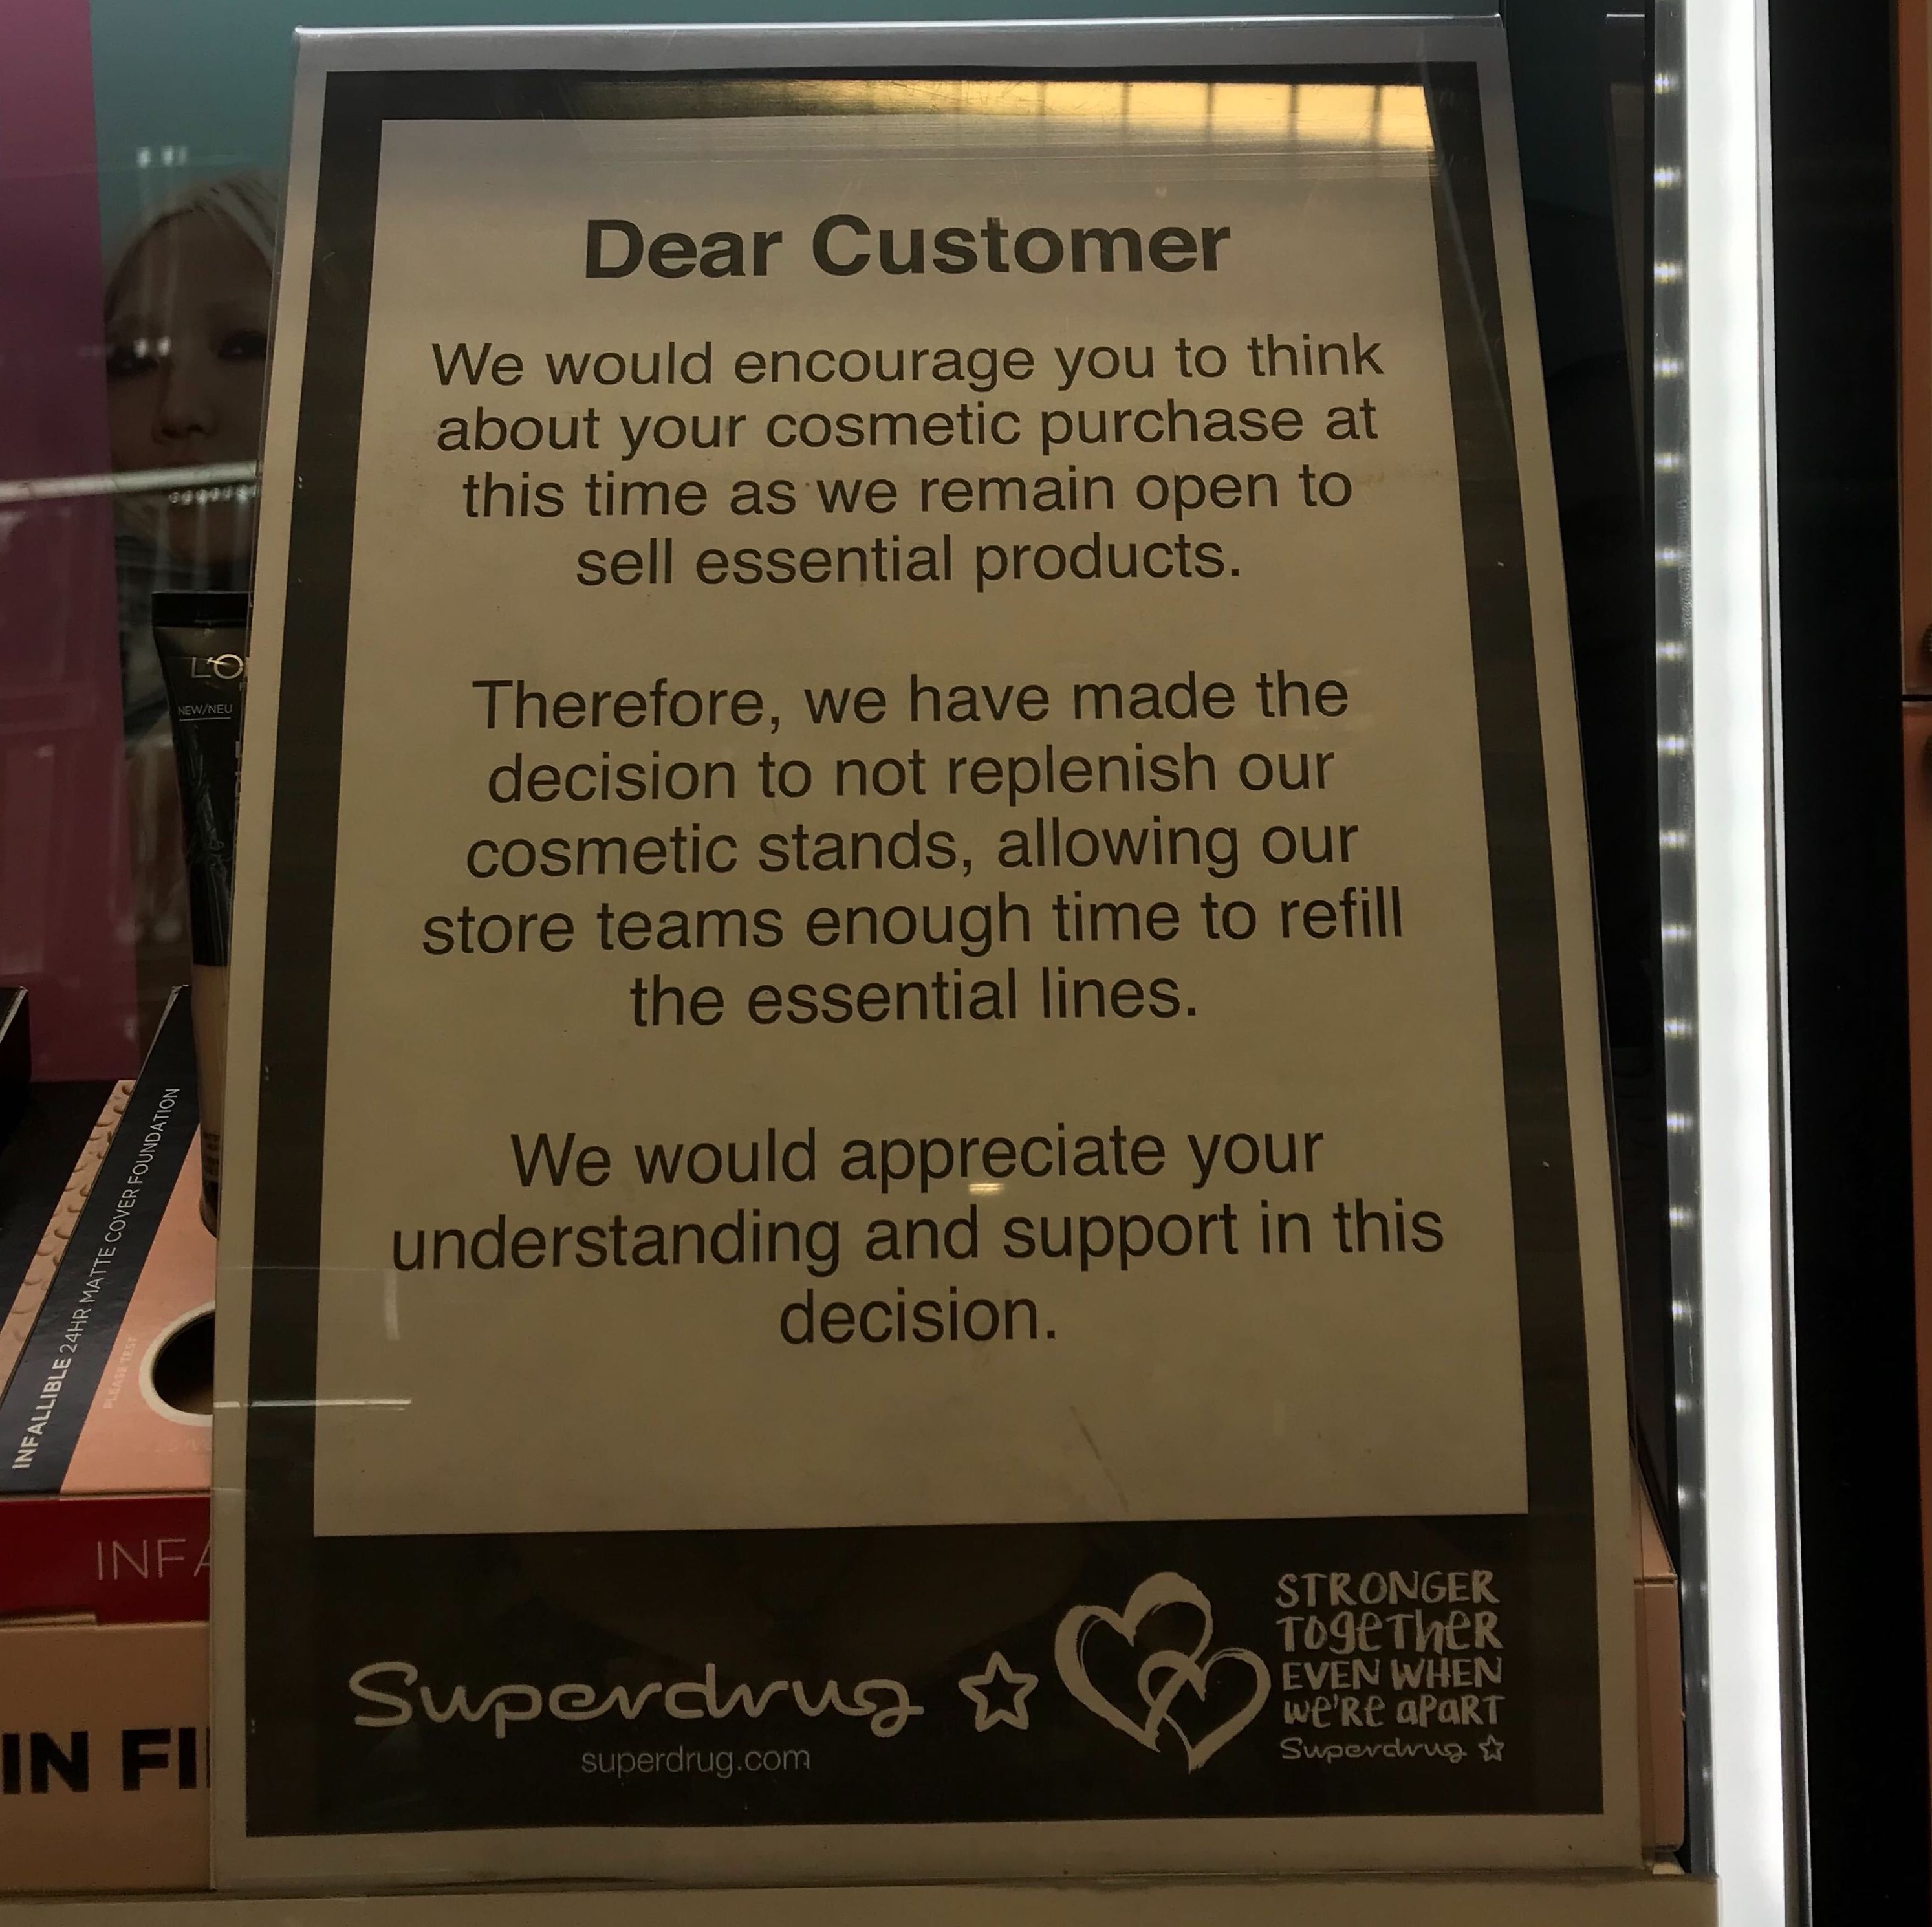 A notice in a store urging customers to think about their cosmetic purchases